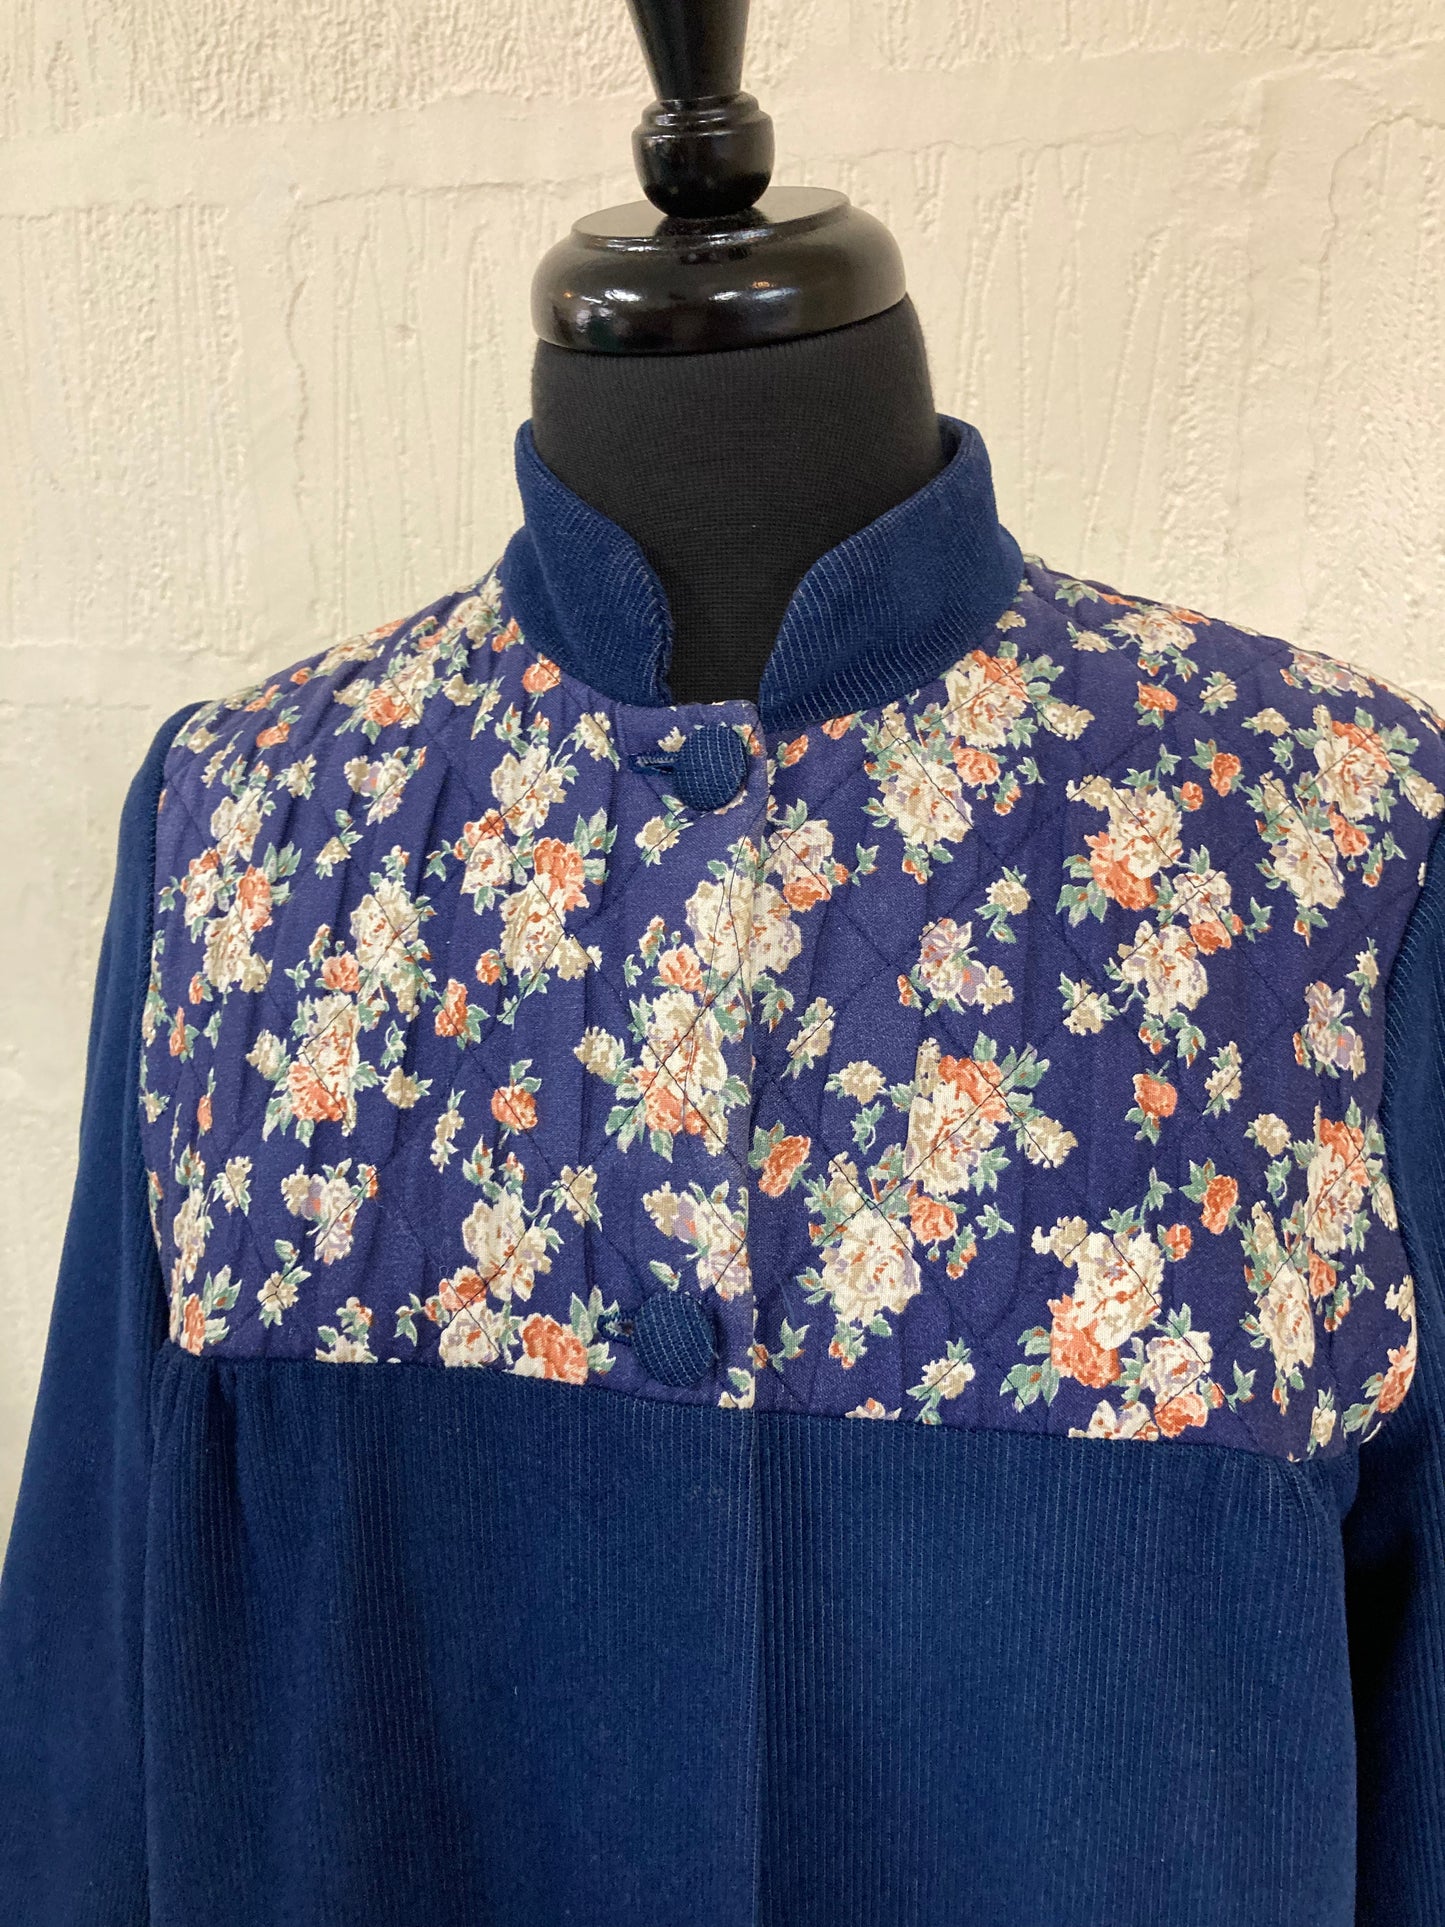 1970s Dark Blue with Floral Quilting Housecoat l Coat Size 12/14